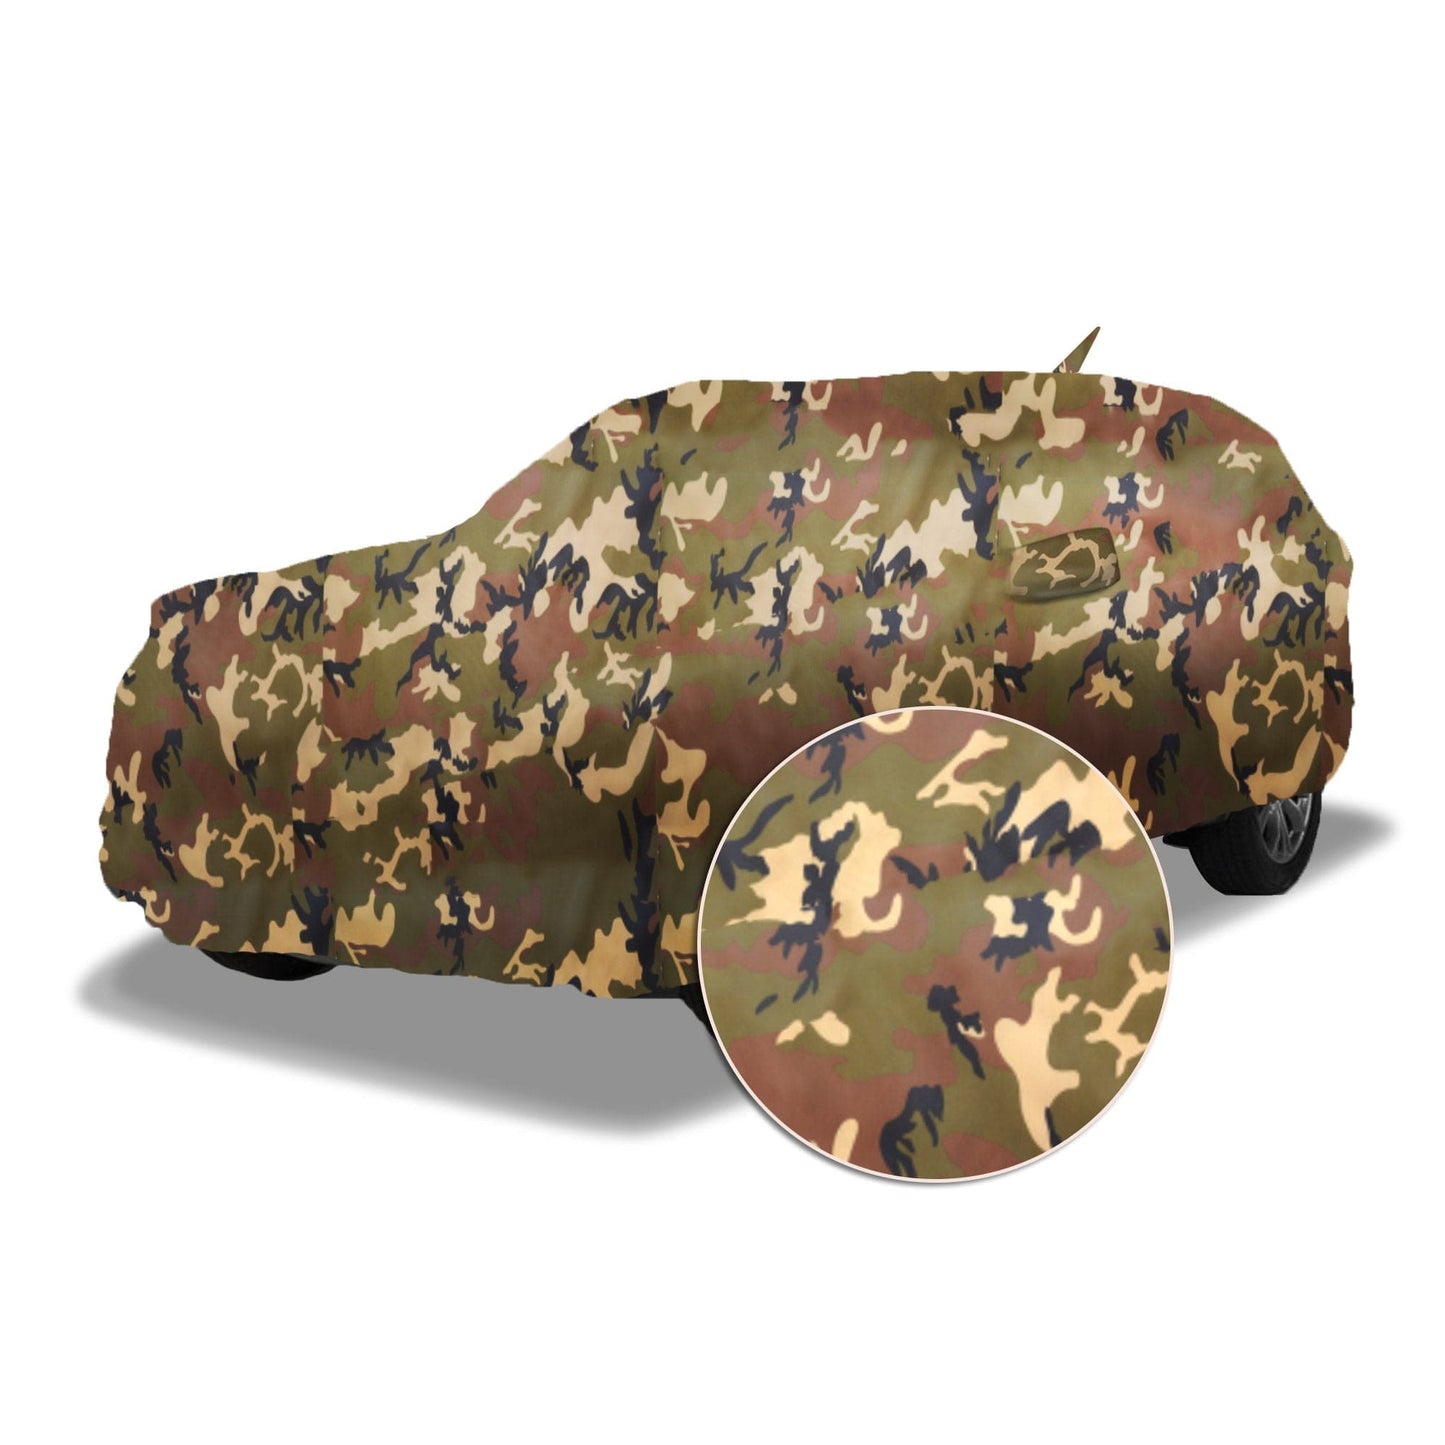 Ascot Mahindra XUV 400 Car Body Cover Extra Strong & Dust Proof Jungle Military Car Cover with UV Proof & Water-Resistant Coating